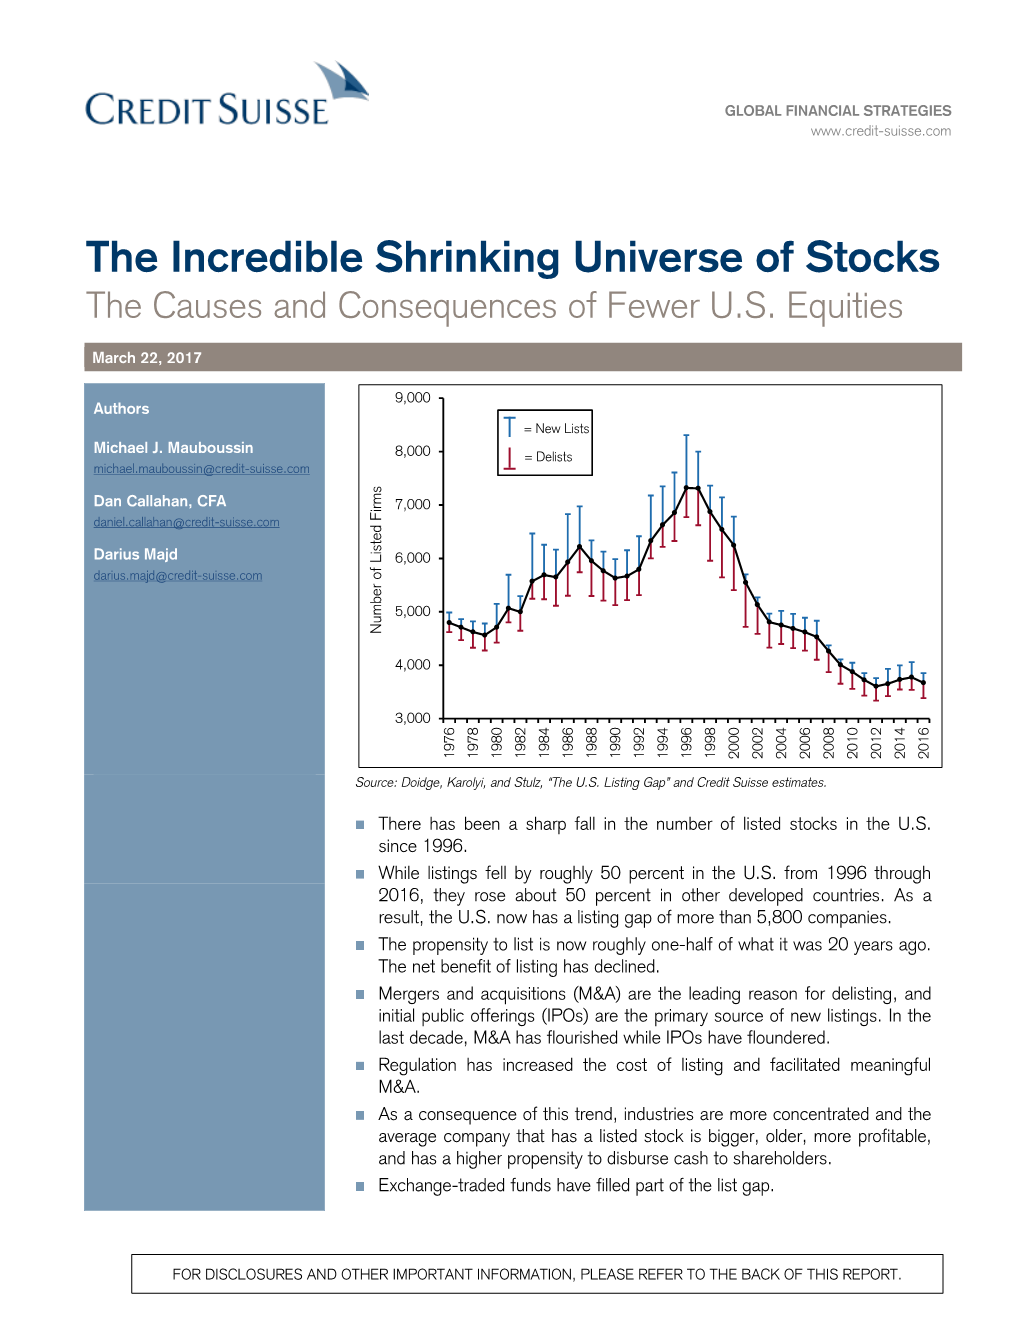 The Incredible Shrinking Universe of Stocks the Causes and Consequences of Fewer U.S